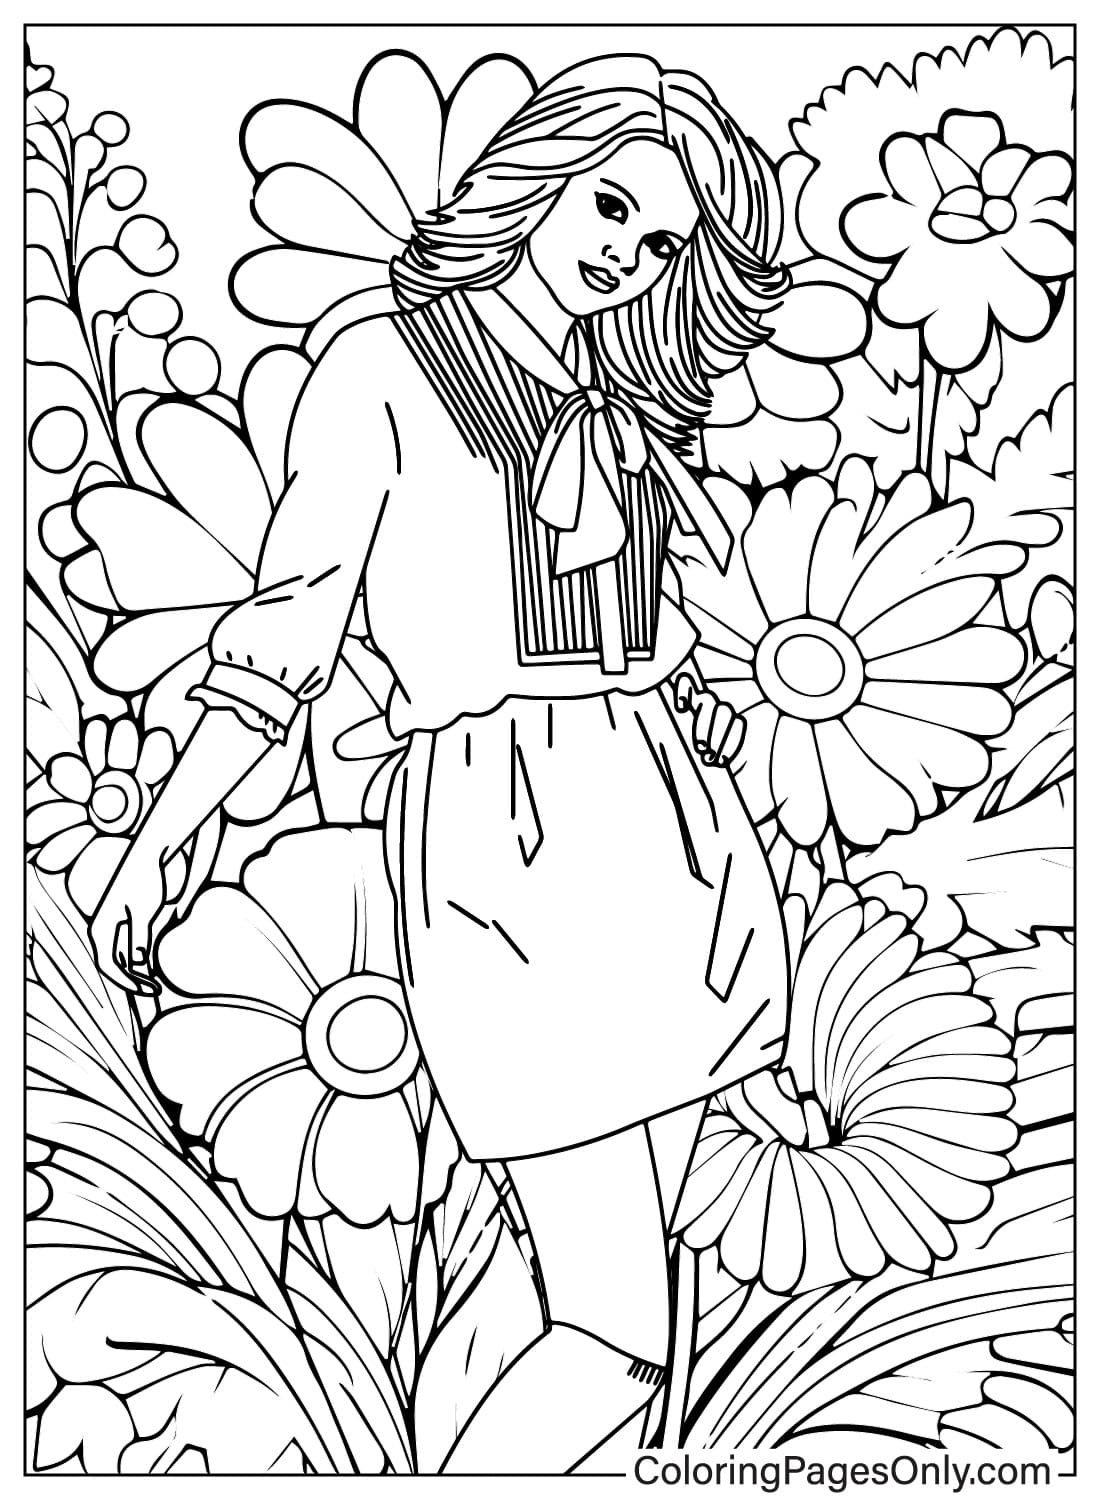 Flower and Selena Gomez Coloring Page from Selena Gomez